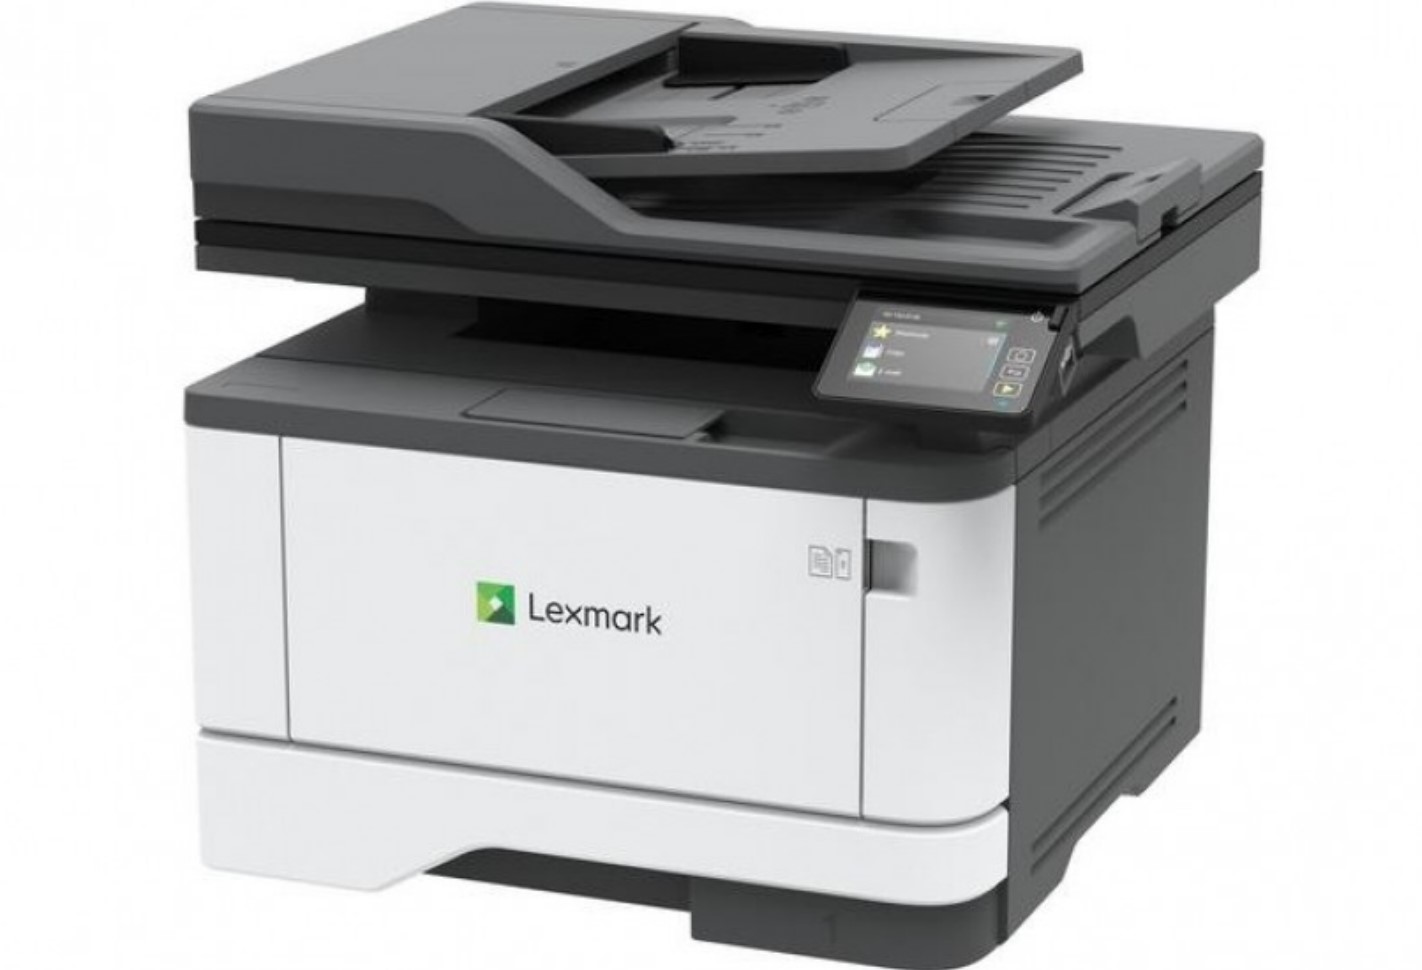 Lexmark MB3442i Mono MFP laser printer is very fast (review)